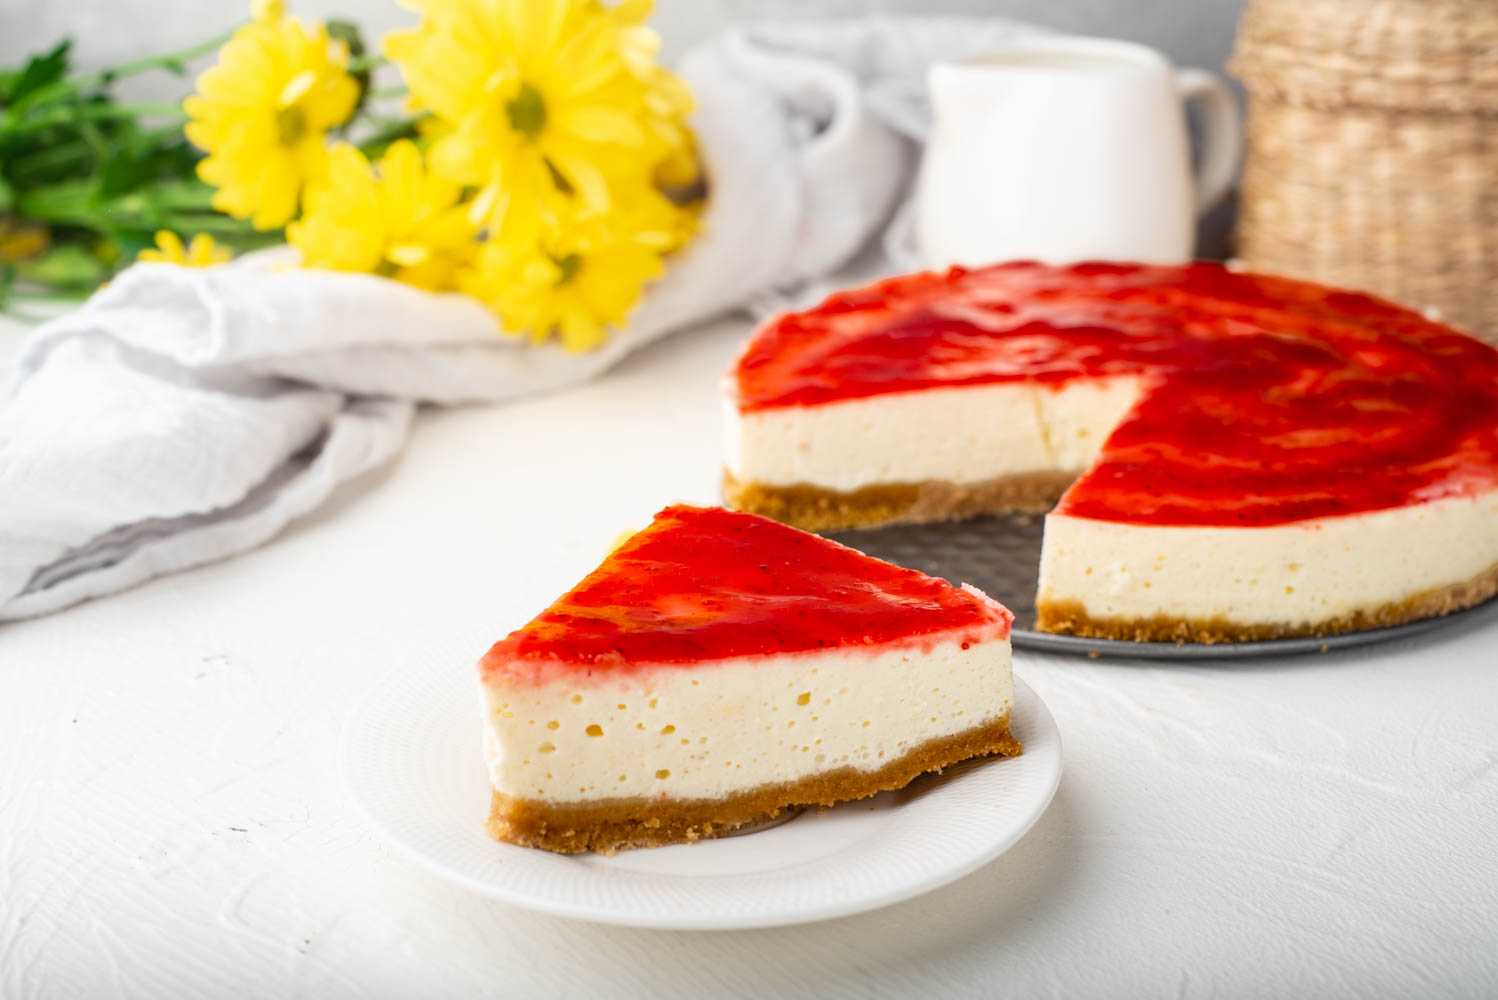 Cheesecake slice with strawberry jam on top and crust on the bottom